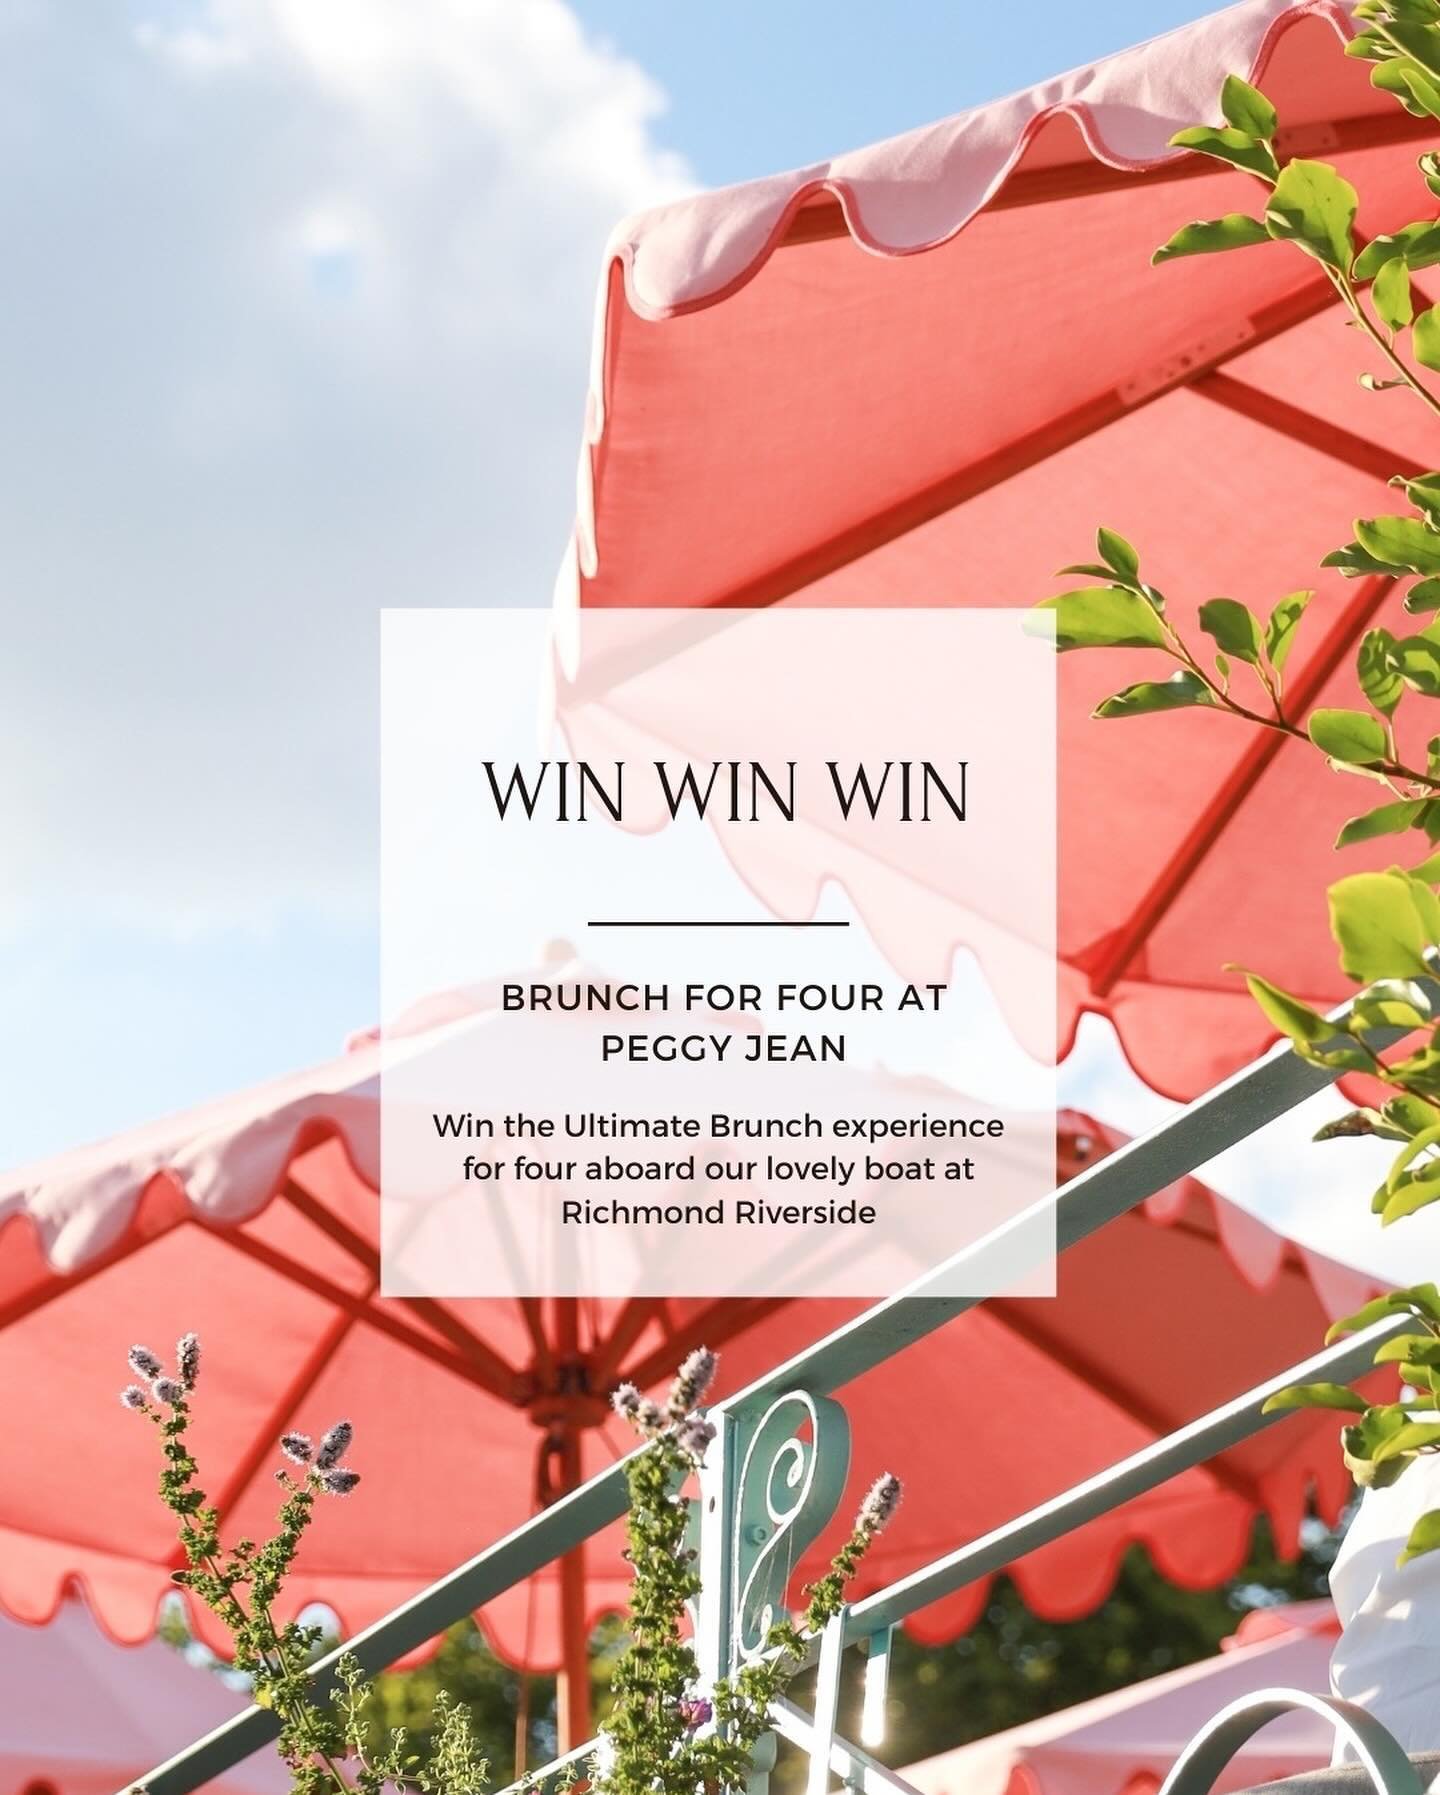 Win the Ultimate Brunch Experience for four at Peggy Jean☀️😍
⠀⠀⠀⠀⠀⠀⠀⠀⠀
To celebrate Peggy Jean being back in action for the summer, we are giving away the ultimate brunch and cocktails experience for you and three friends👏🏻🤩 It&rsquo;s the perfec